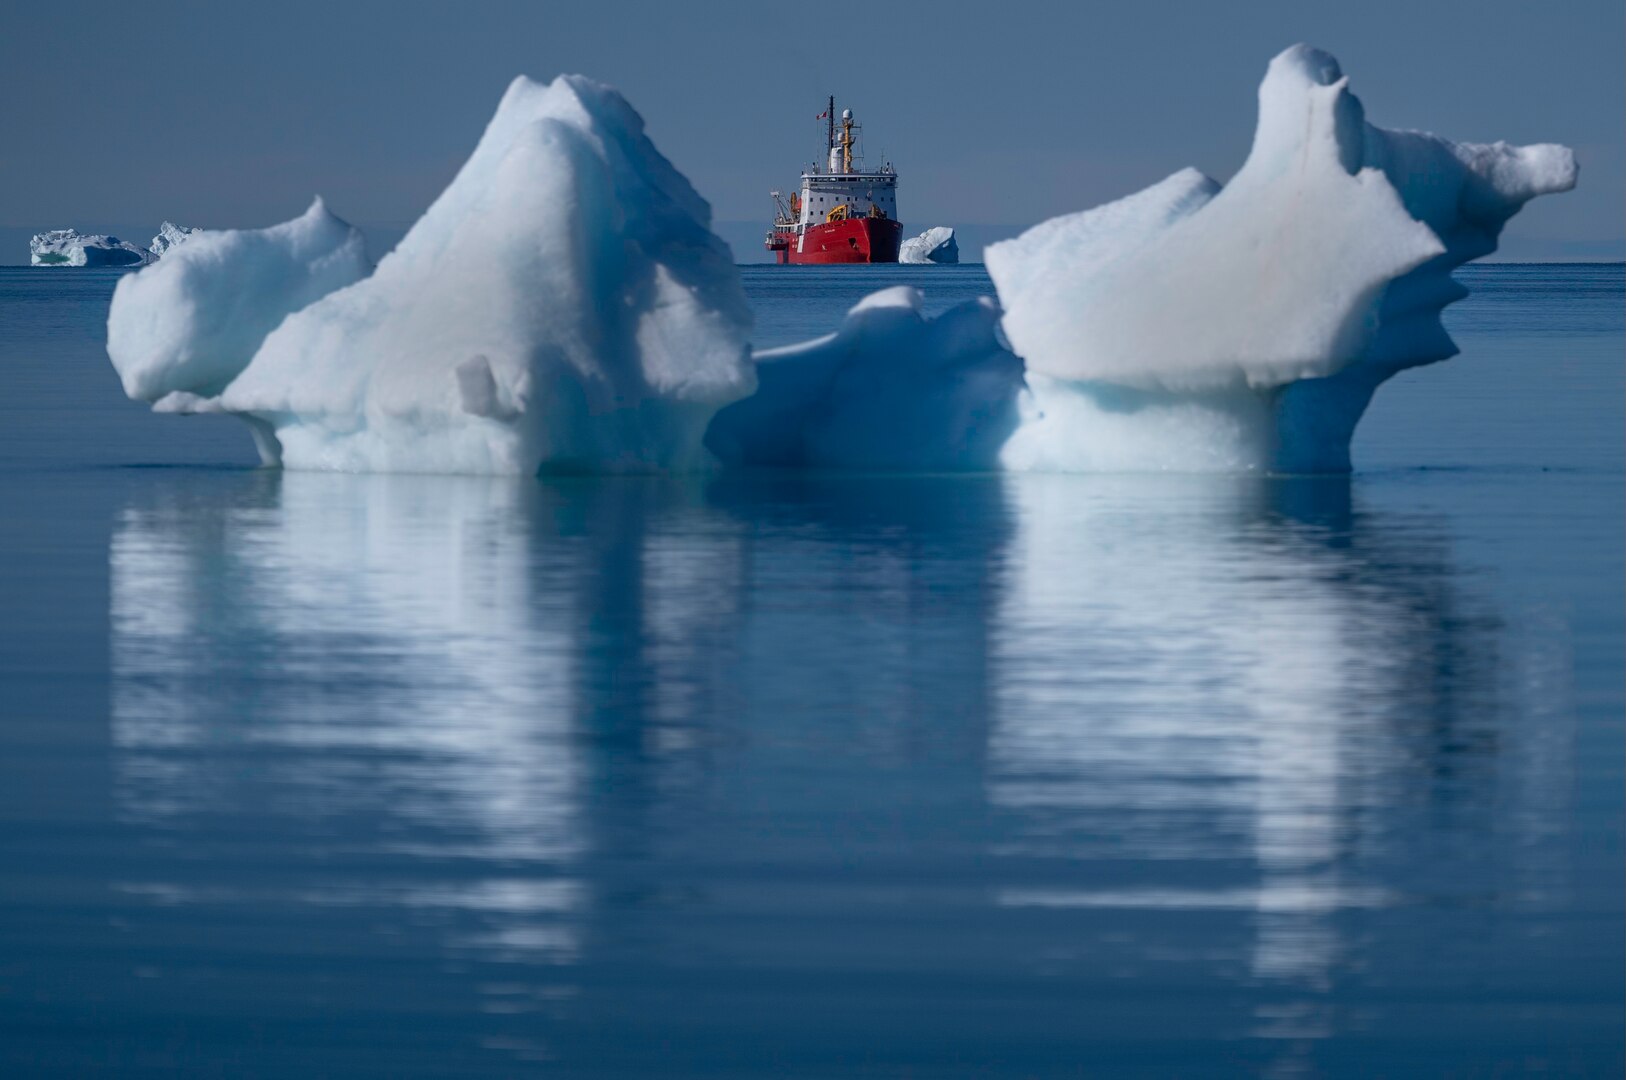 A photo of the Canadian ice breaker boat at Thule Greenland